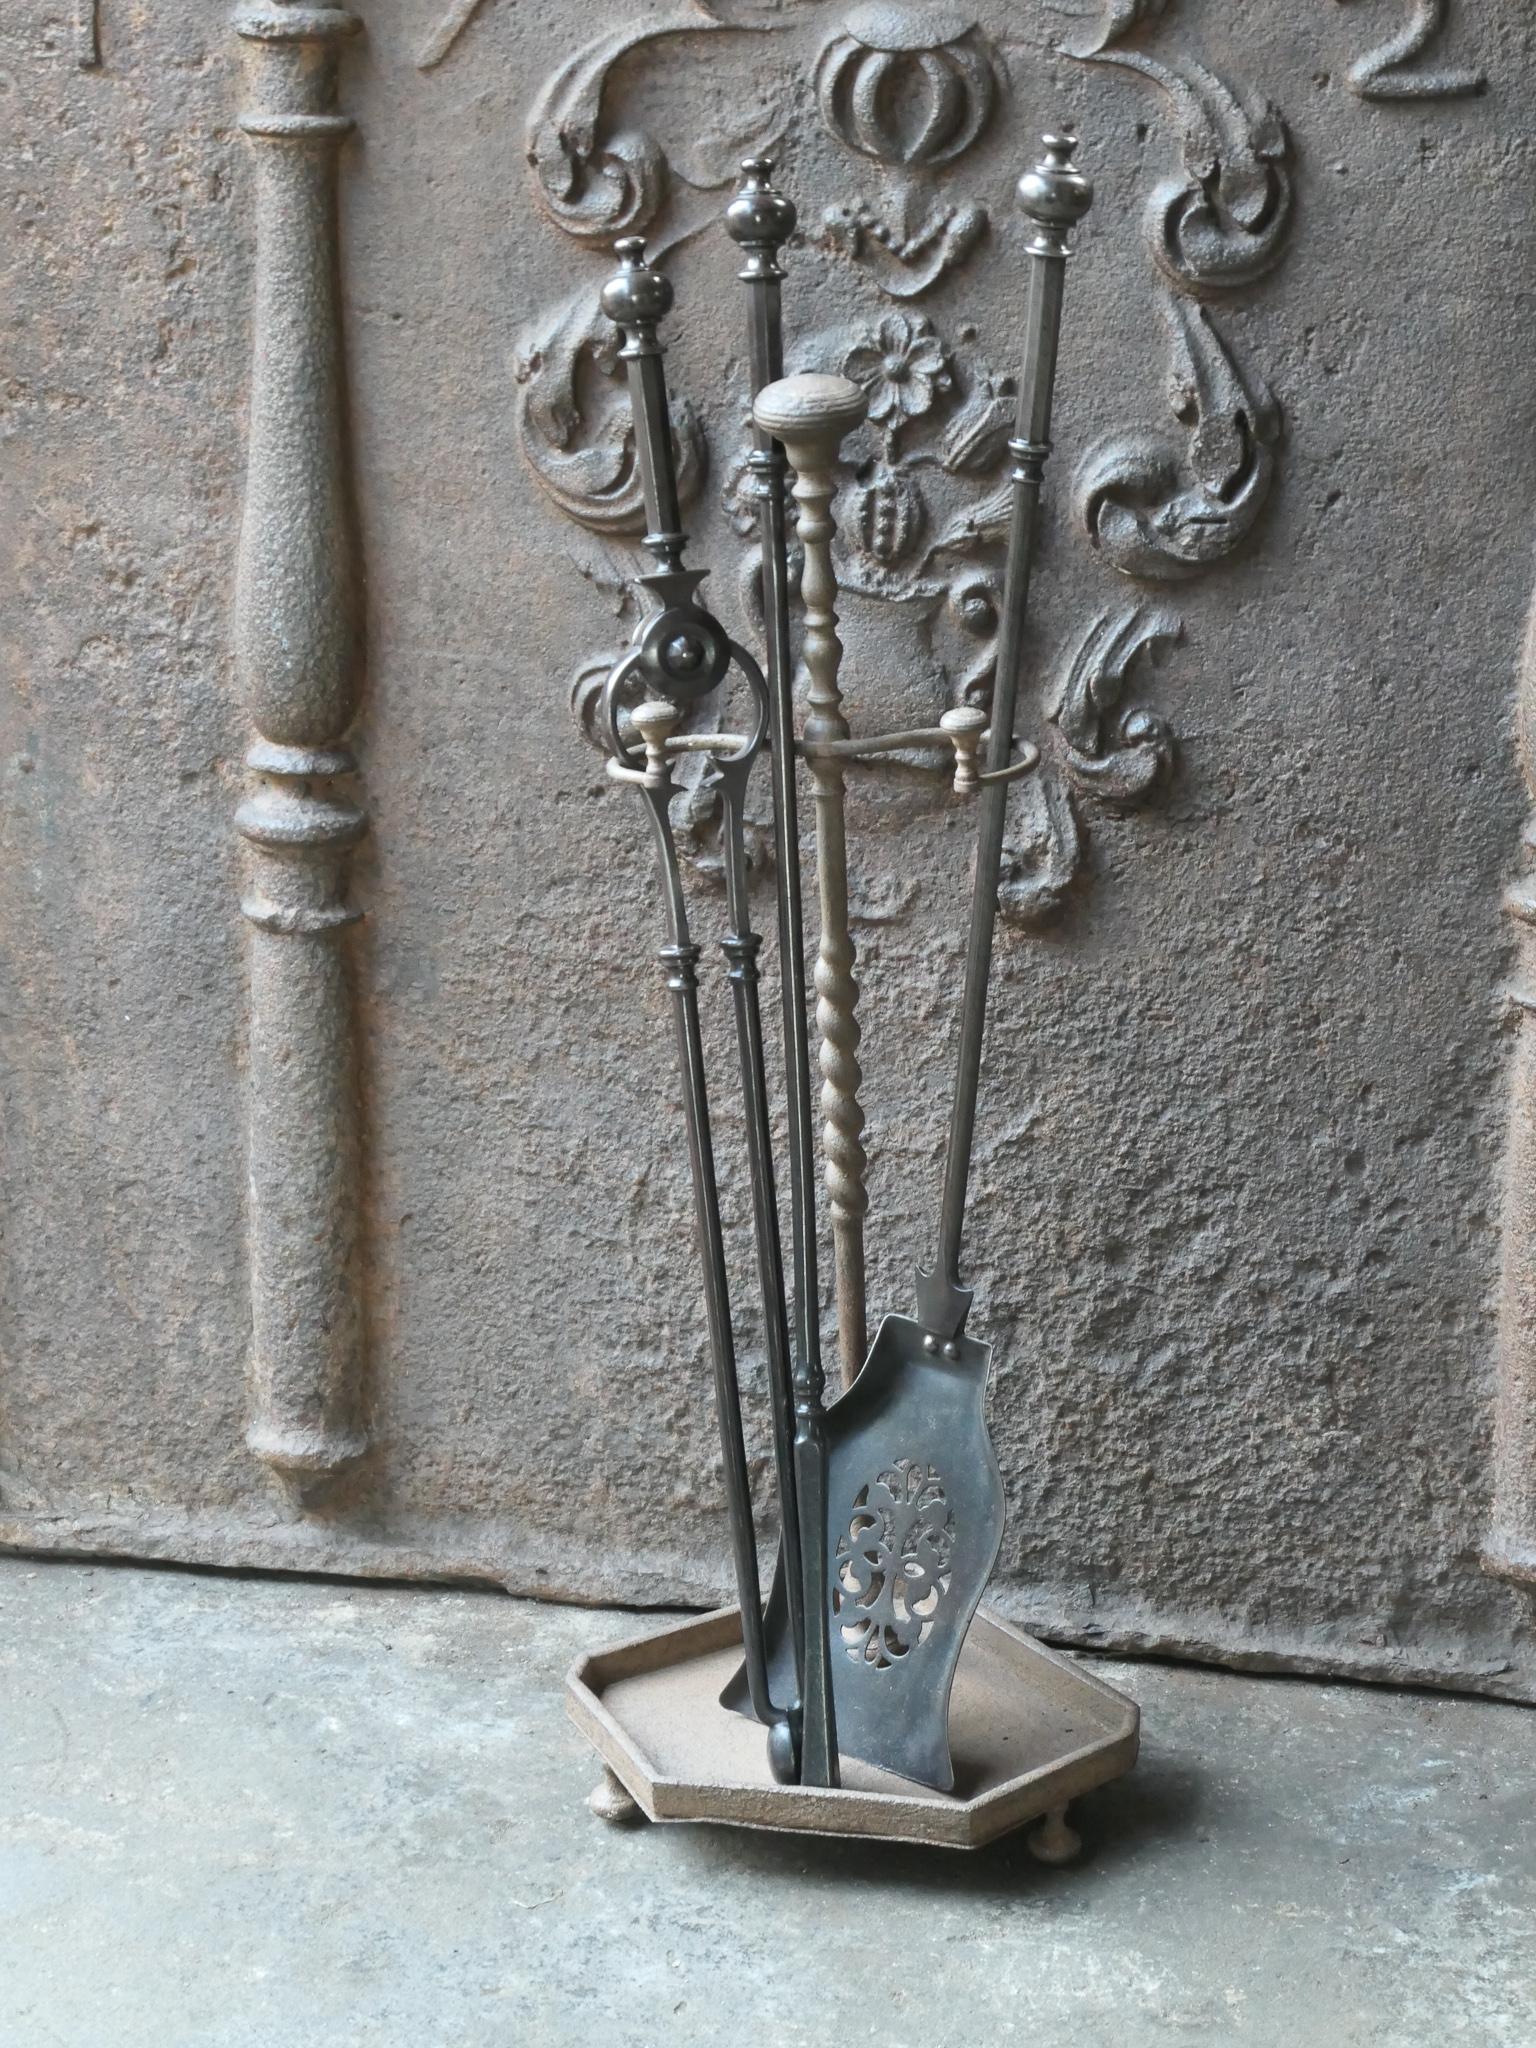 19th century English Victorian period companion set. The tool set consists of thongs, shovel, poker and a stand. Made of cast iron and wrought iron. It is in a good condition and is fully functional.